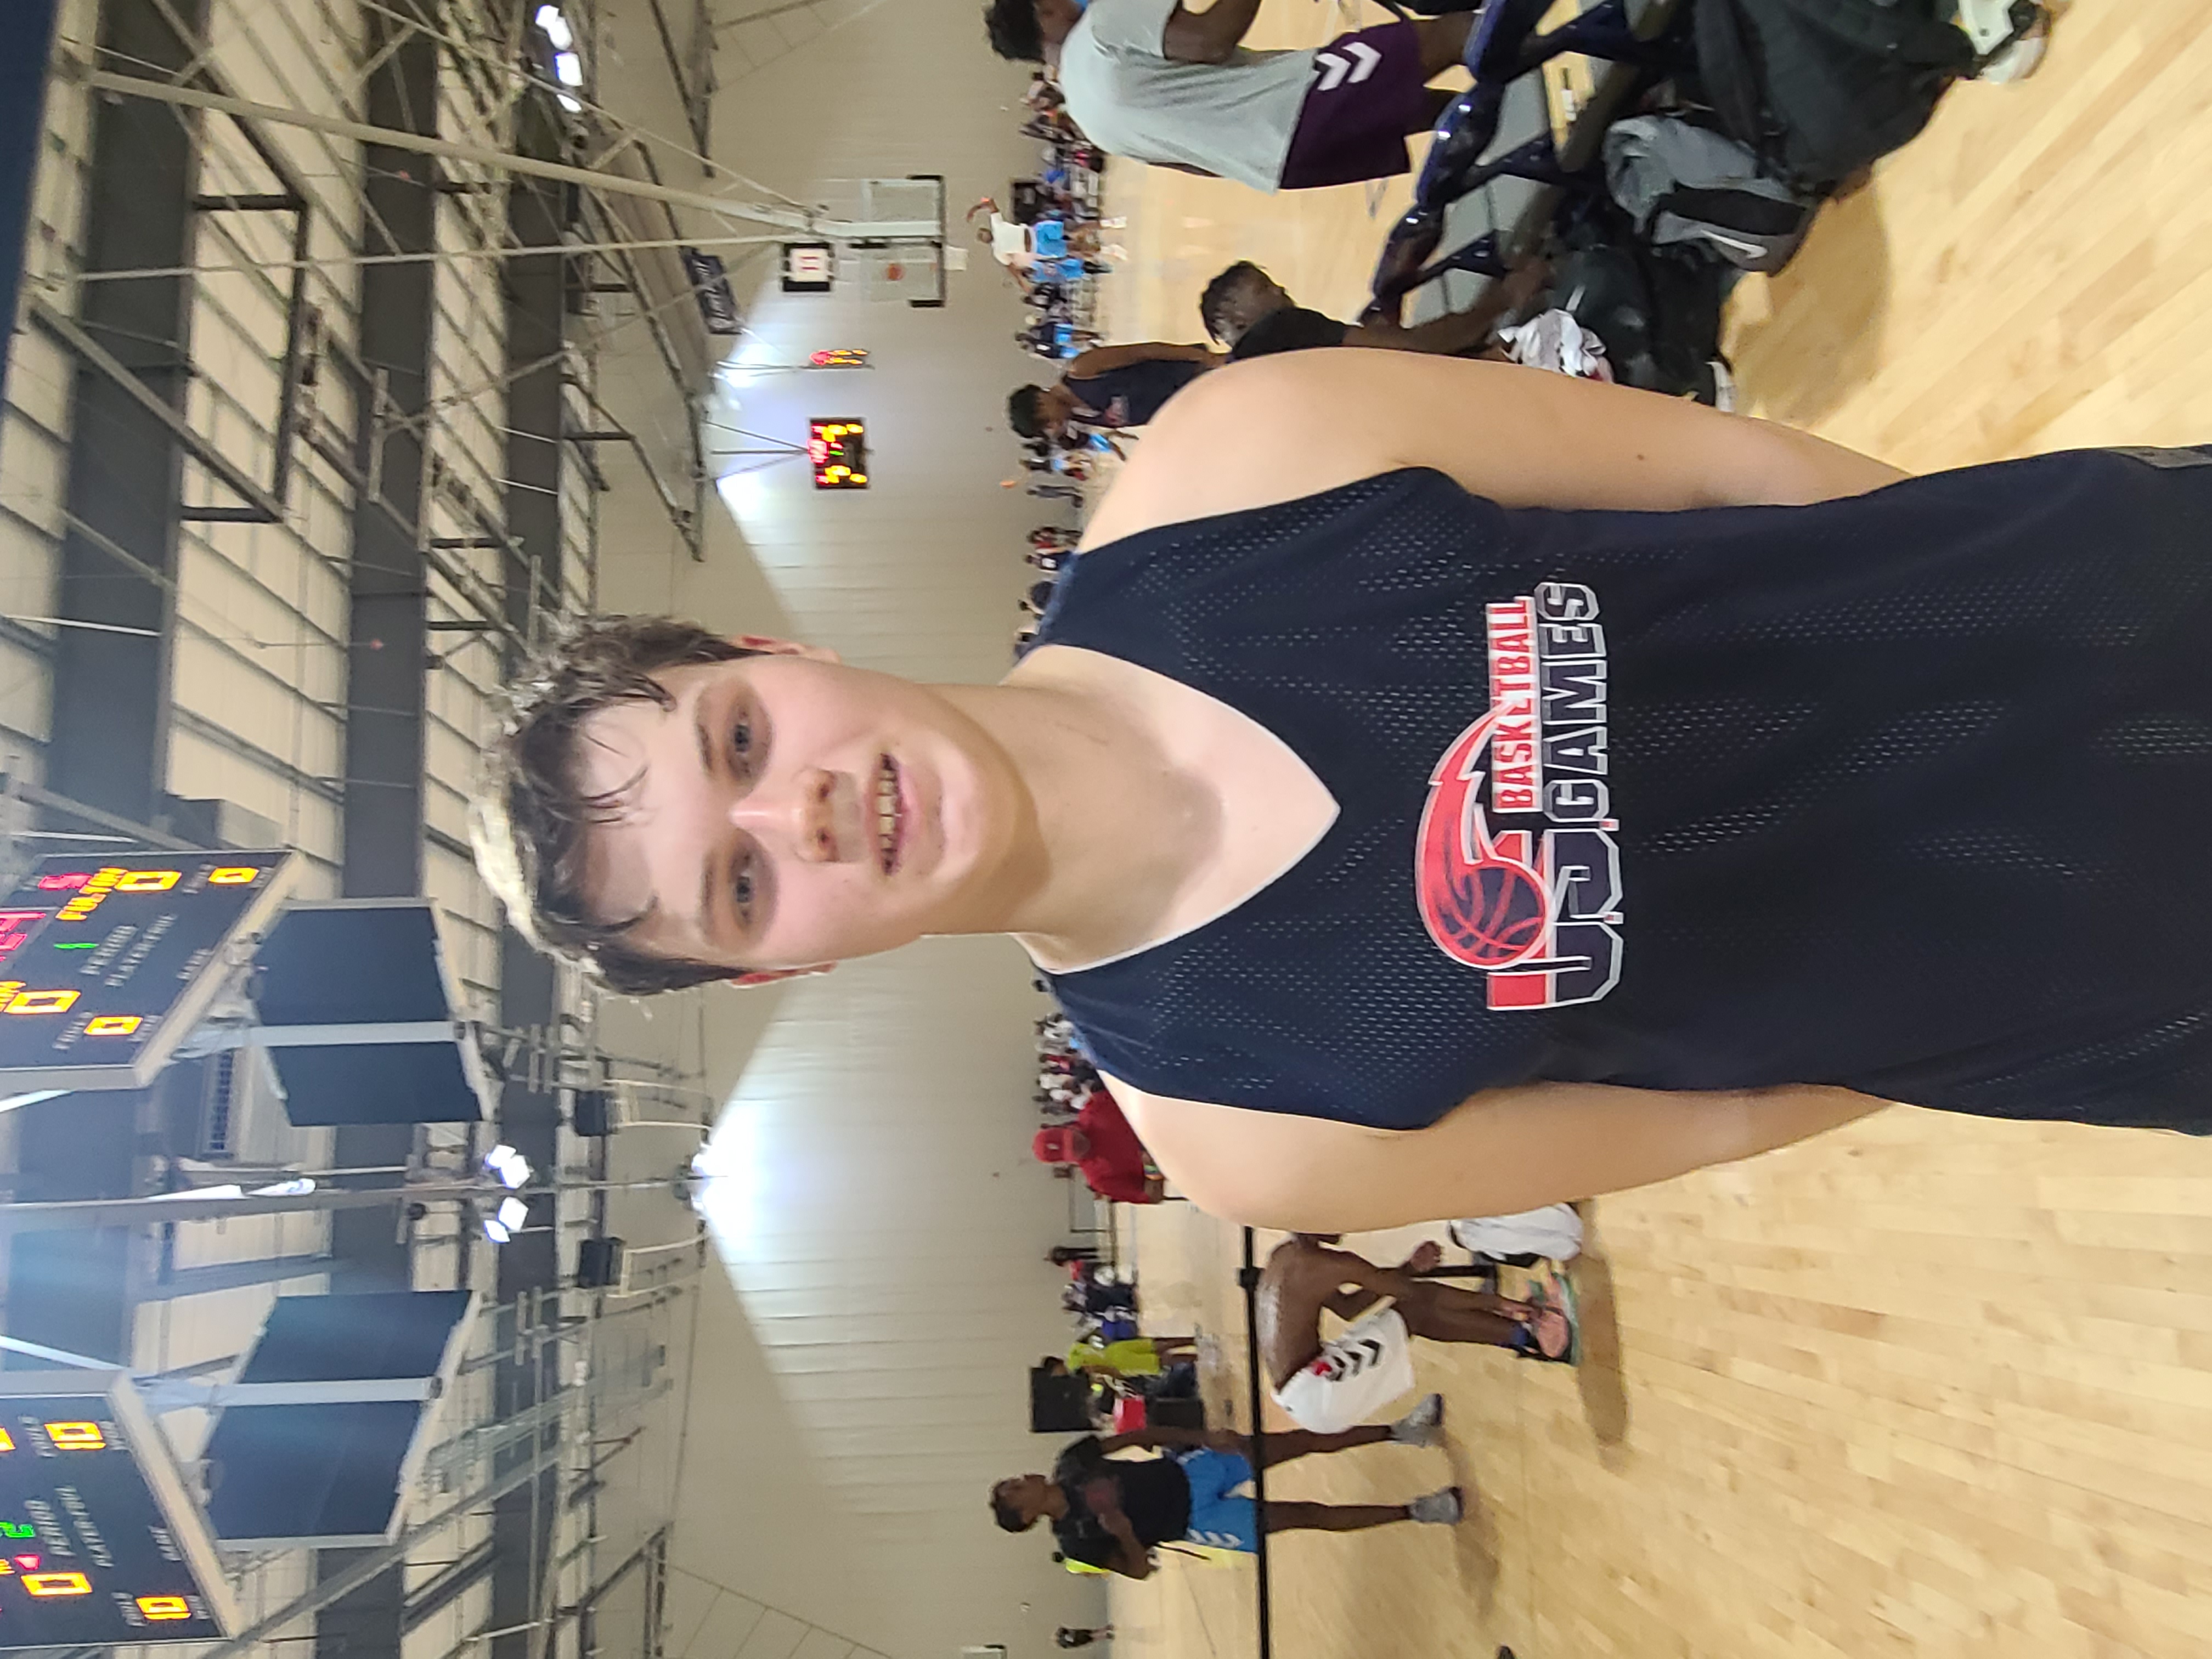 US Basketball Games: GA Standouts Pt 2 - August 11, 2021